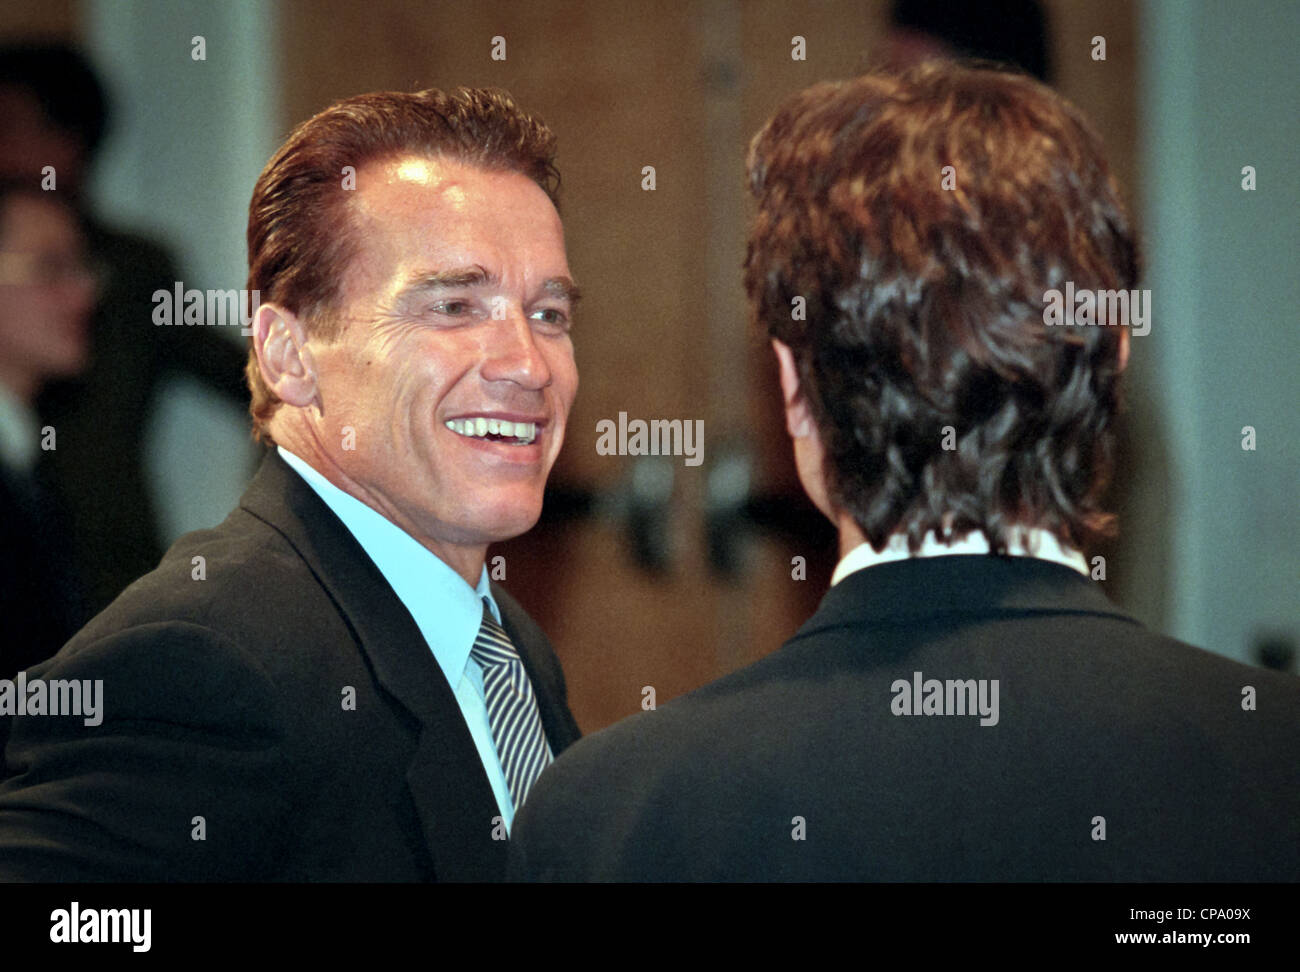 Actor Arnold Schwarzenegger at the dedication of the Peace Corps headquarters September 15, 1998 in Washington, DC. Stock Photo